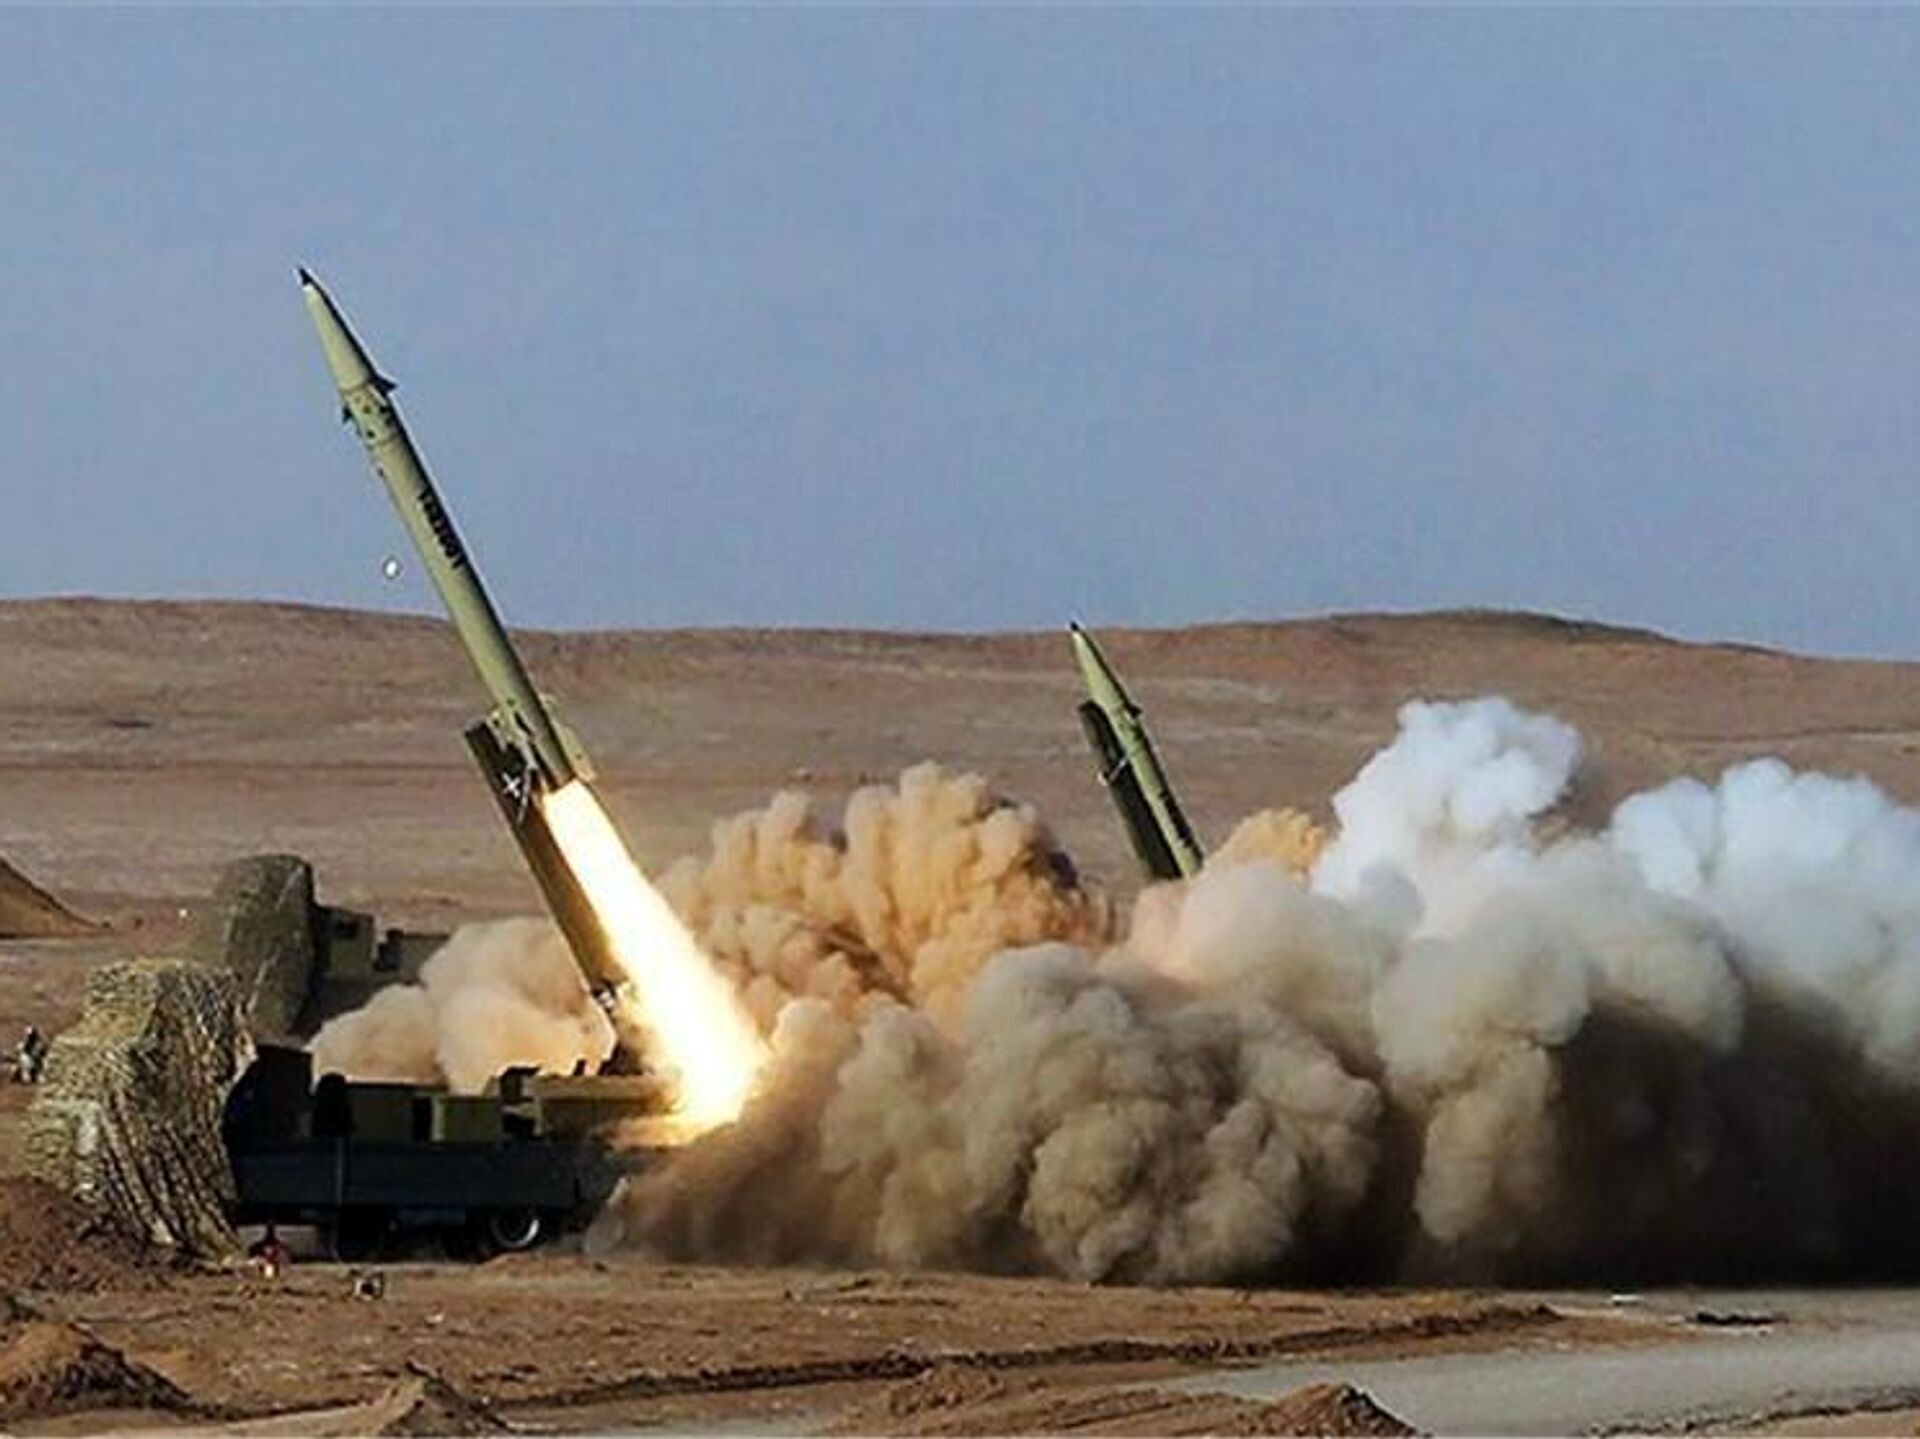 All Iranian hypersonic missiles hit their targets in occupied lands successfully